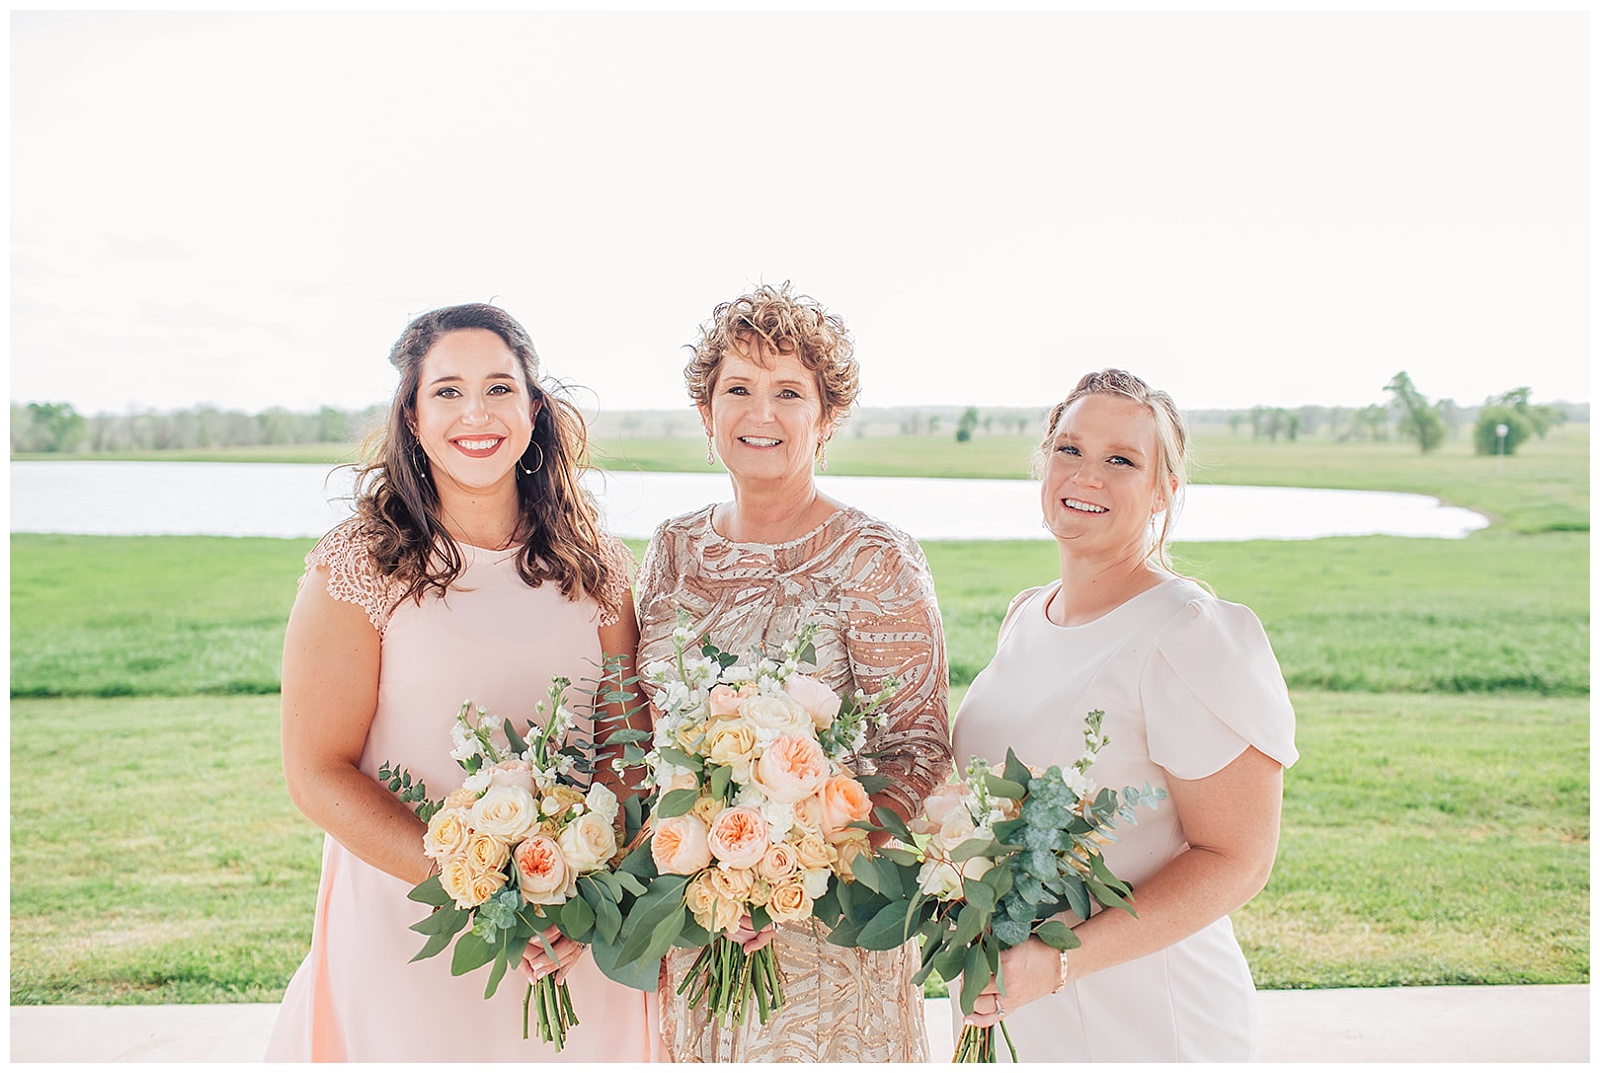 Refreshing bouquets | All-inclusive wedding at Emery's Buffalo Creek 